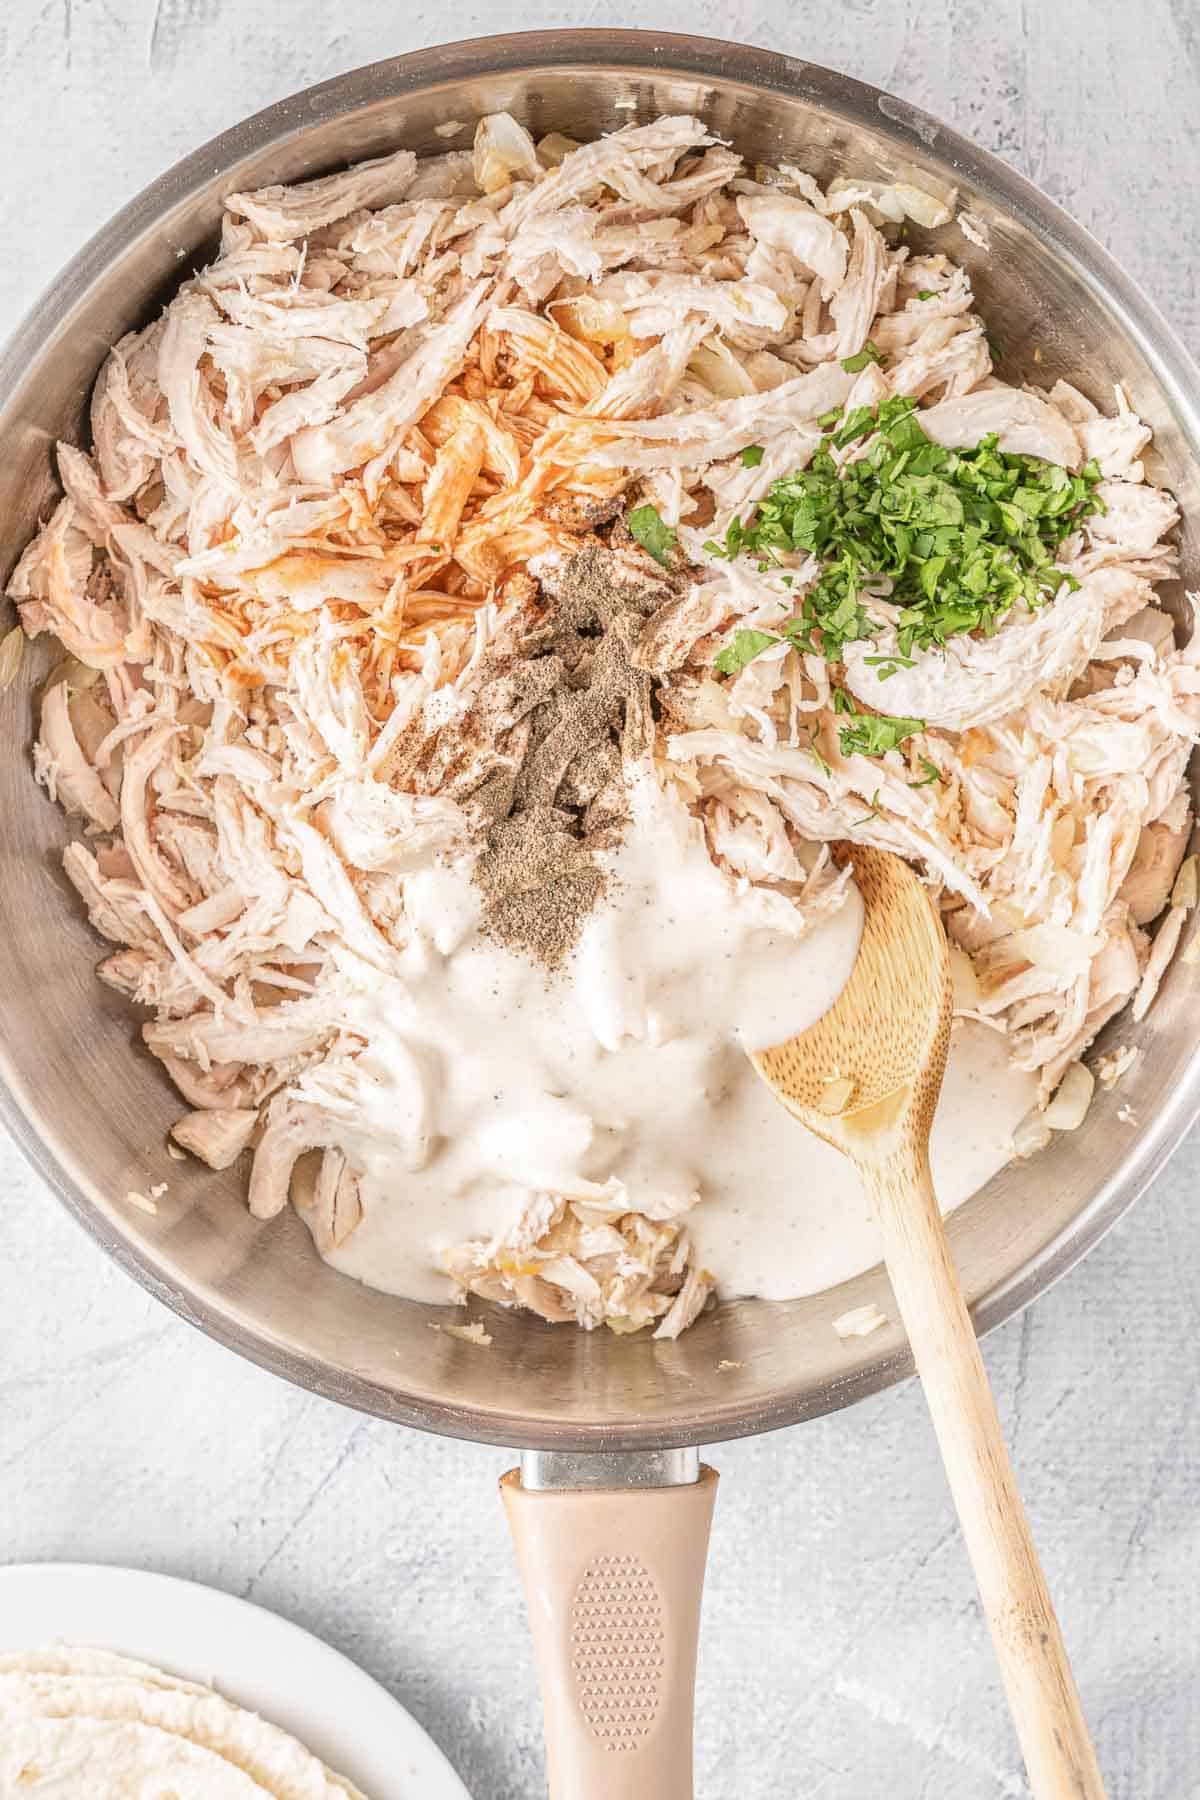 shredded cooked chicken topped with buffalo sauce, ranch dressing, and cilantro in a stainless steel skillet.